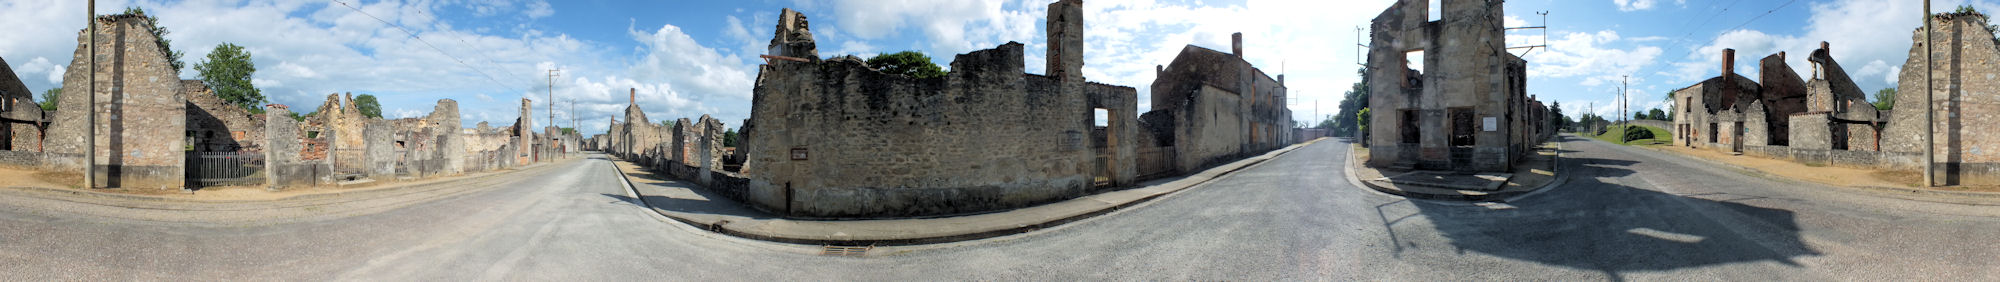 Panorama looking up and down the Rue Emile Desourteaux from the junction with the St Junien road